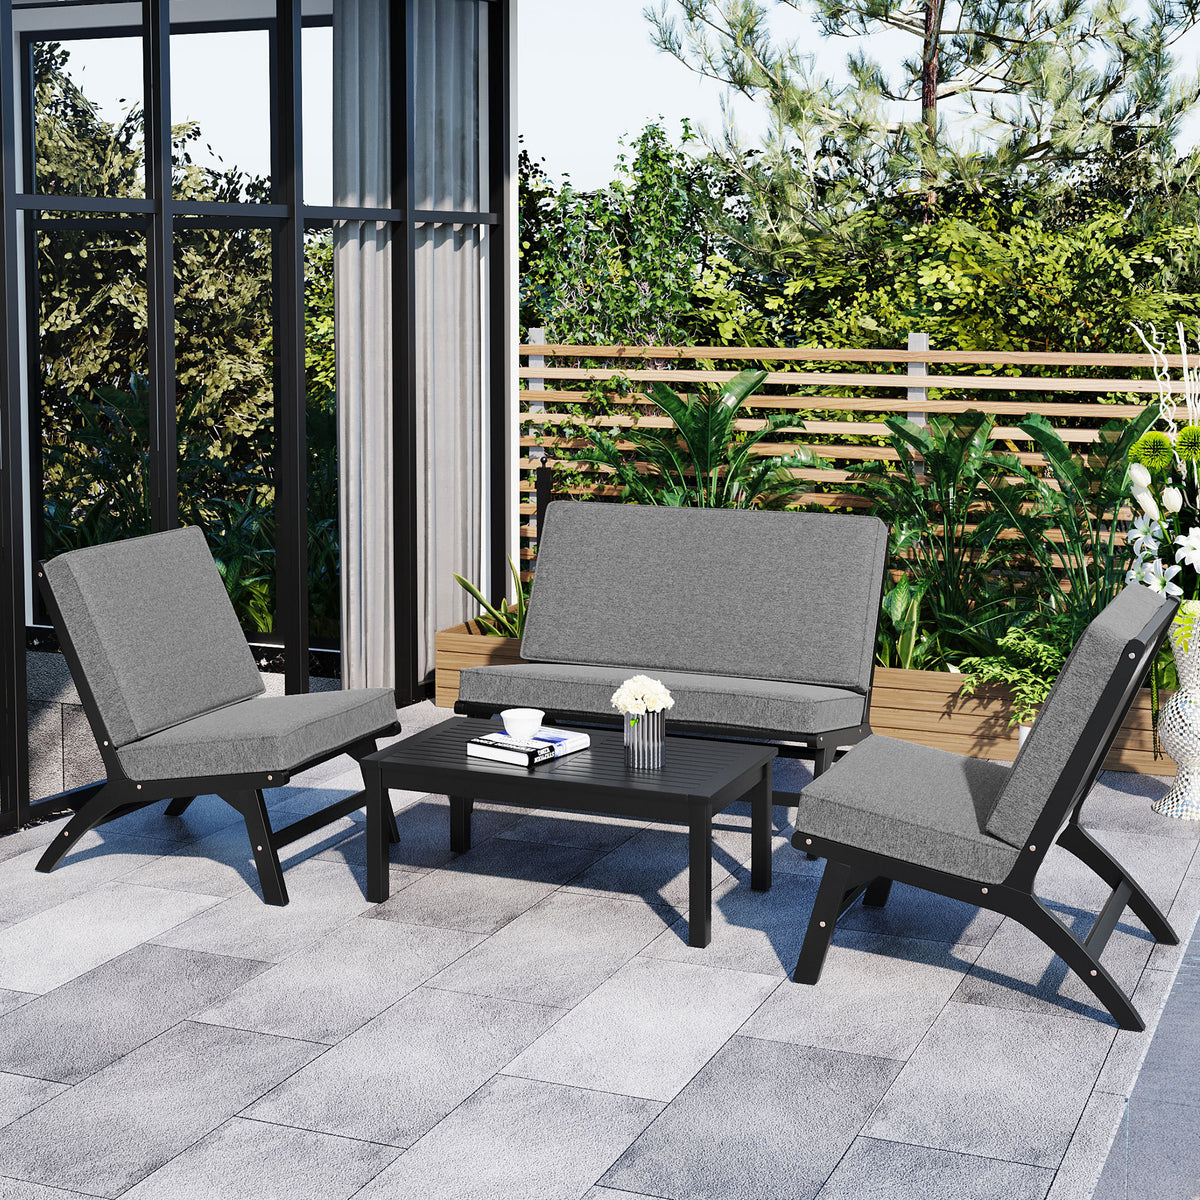 4-Piece V-shaped Chair set, Acacia Solid Wood Outdoor Sofa, Black And Gray